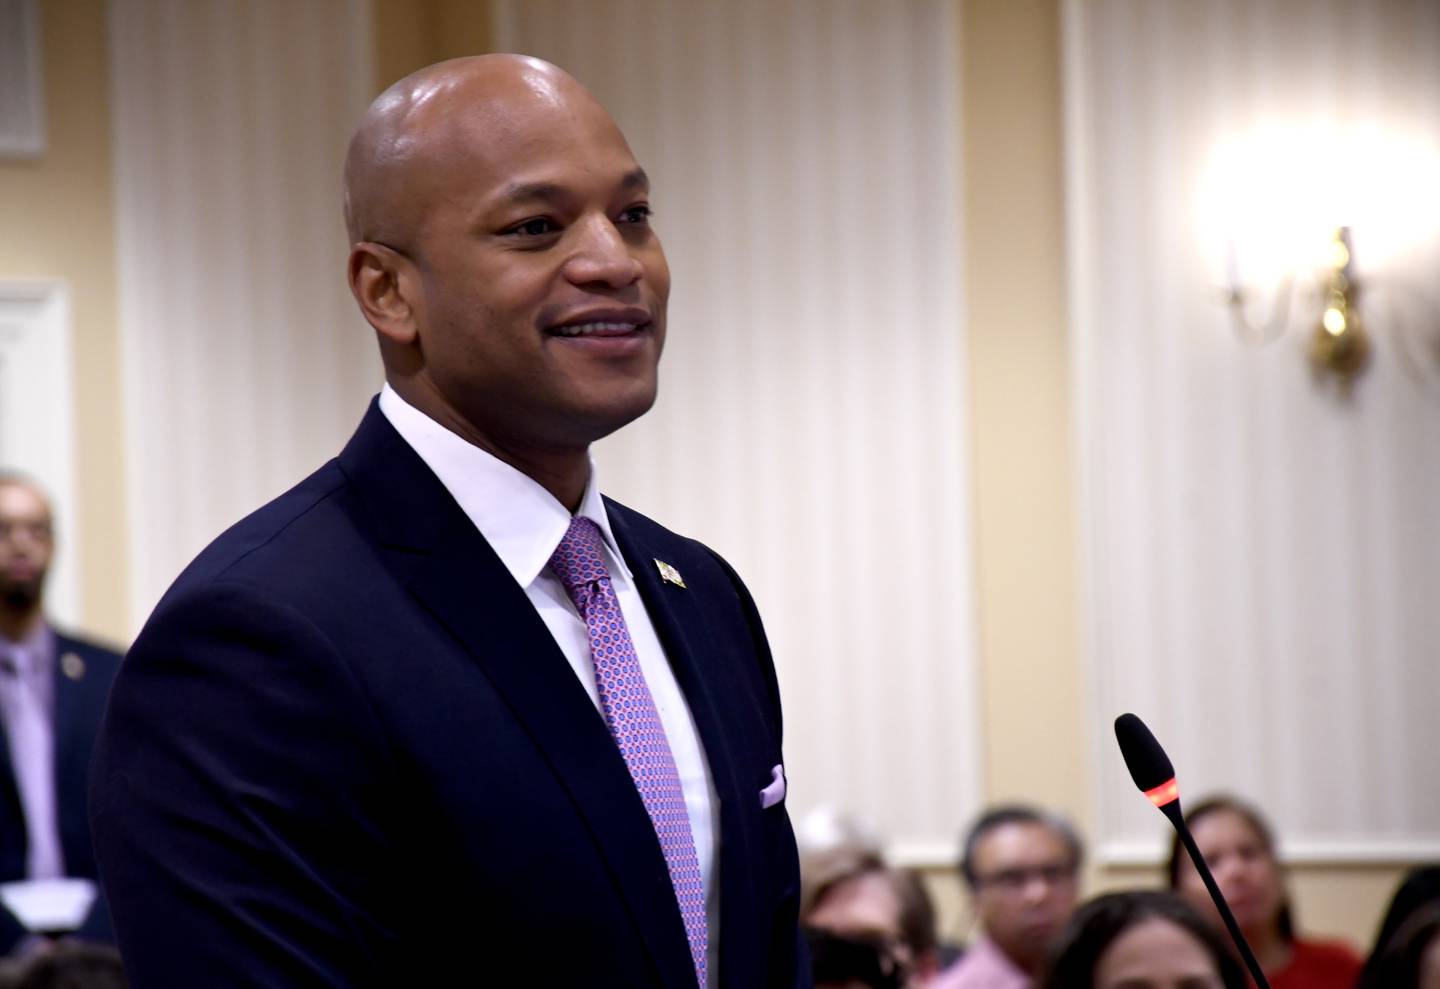 Maryland Gov. Wes Moore talks about his proposed "service year option" for young people during a hearing before the Senate Education, Energy and the Environment Committee in Annapolis on Wednesday, Feb. 22, 2023.